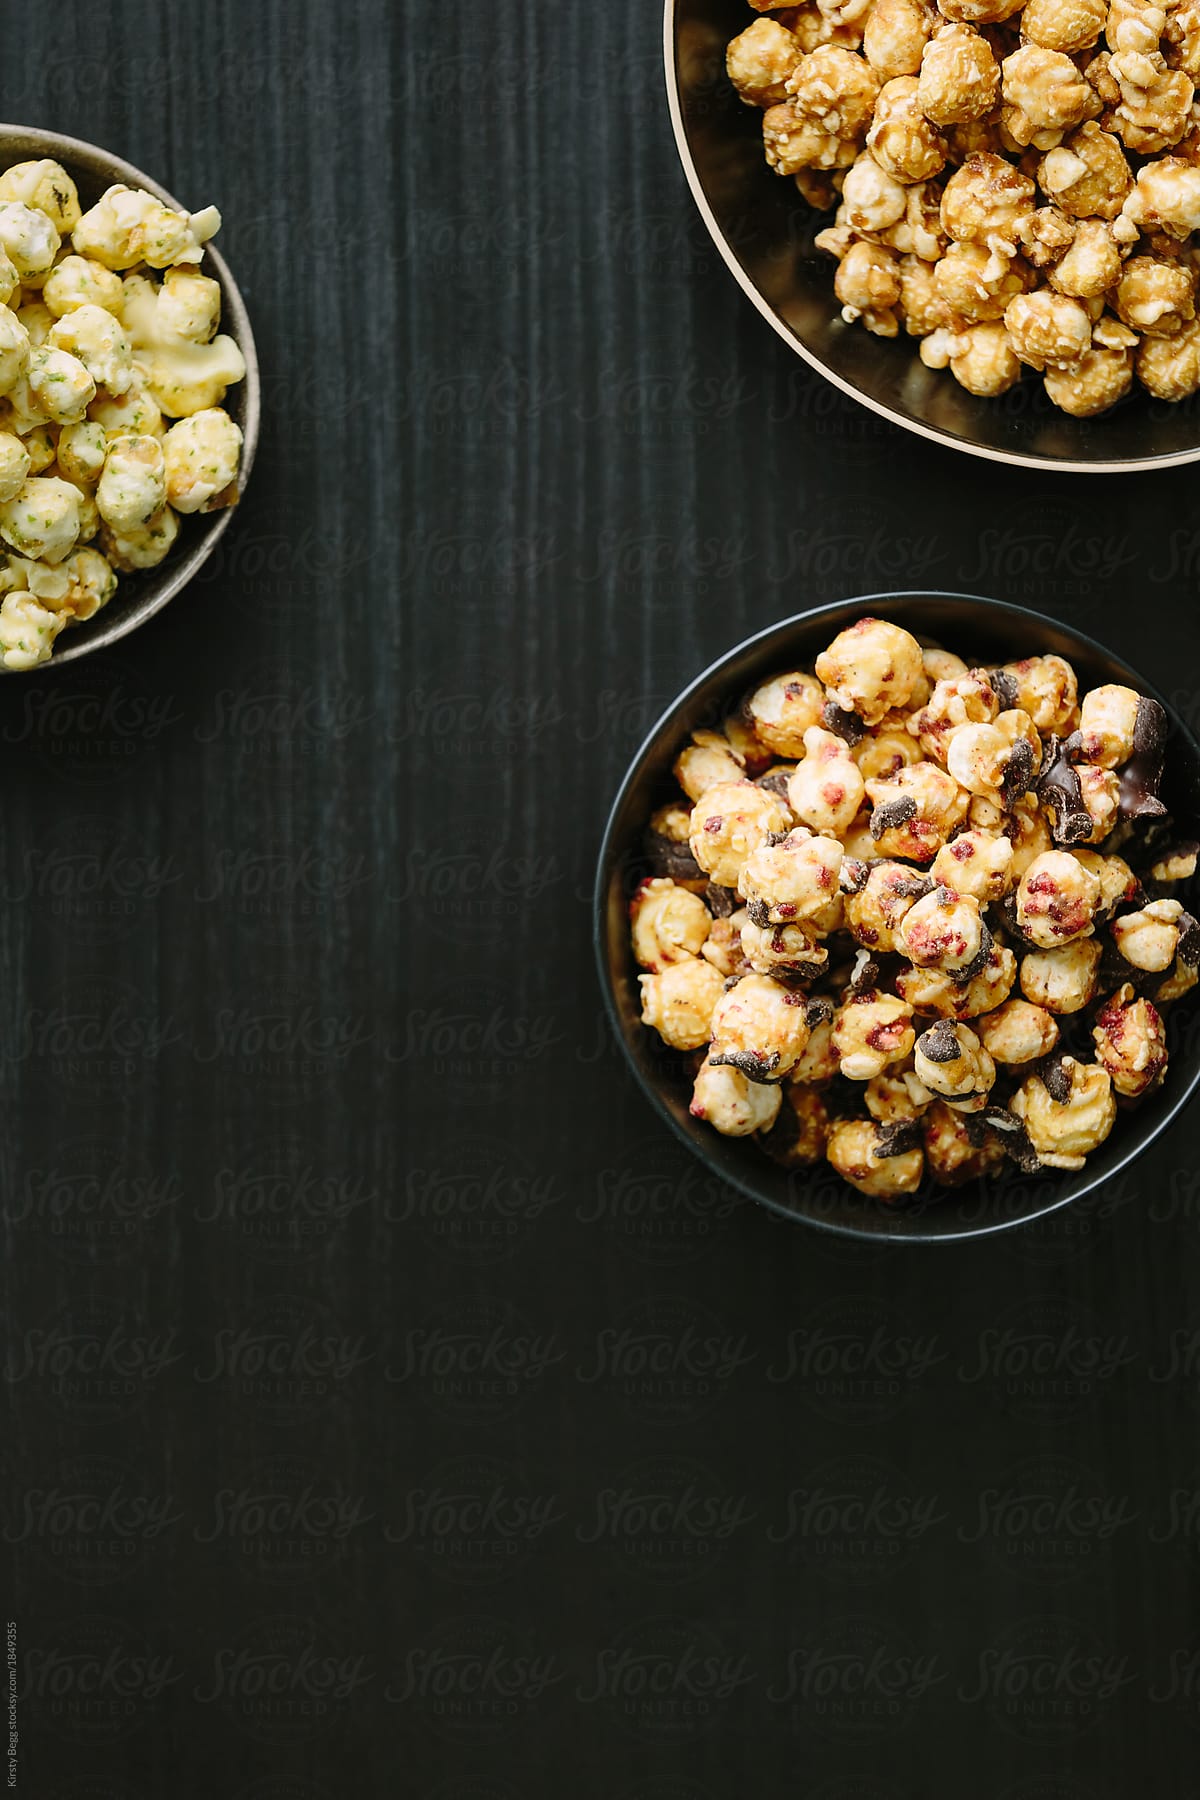 Bowls of adult popcorn flavours